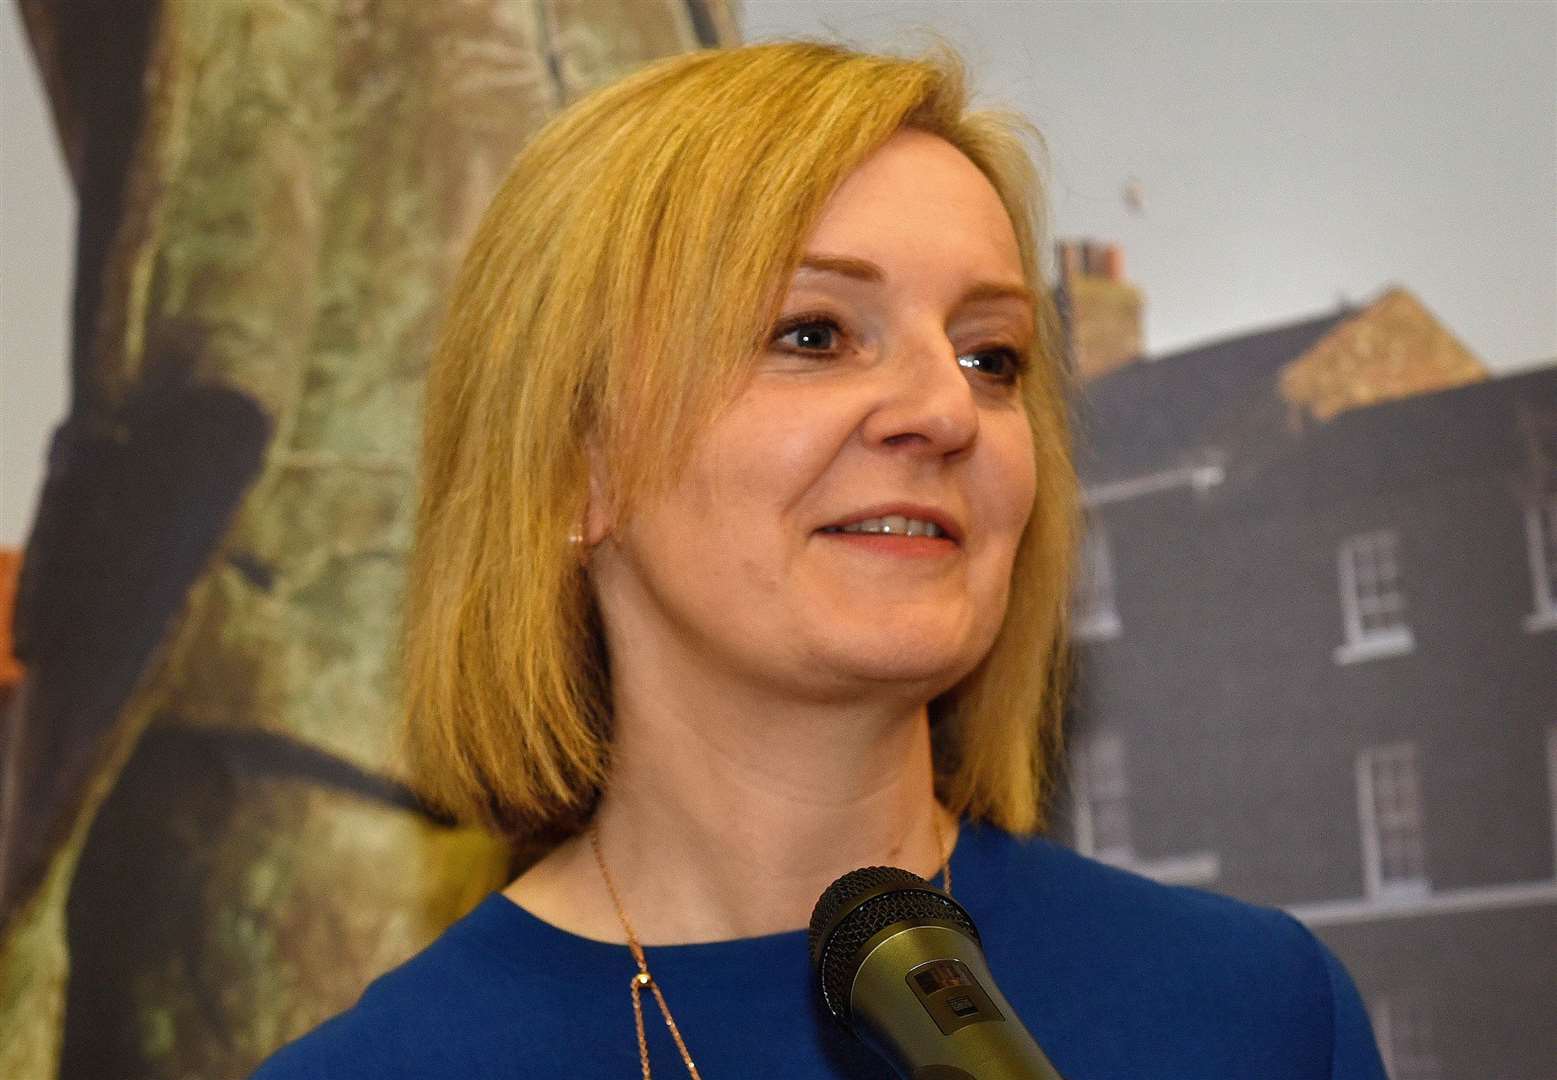 Incoming Prime Minister Liz Truss is under pressure to help businesses, as well as households, with soaring energy costs